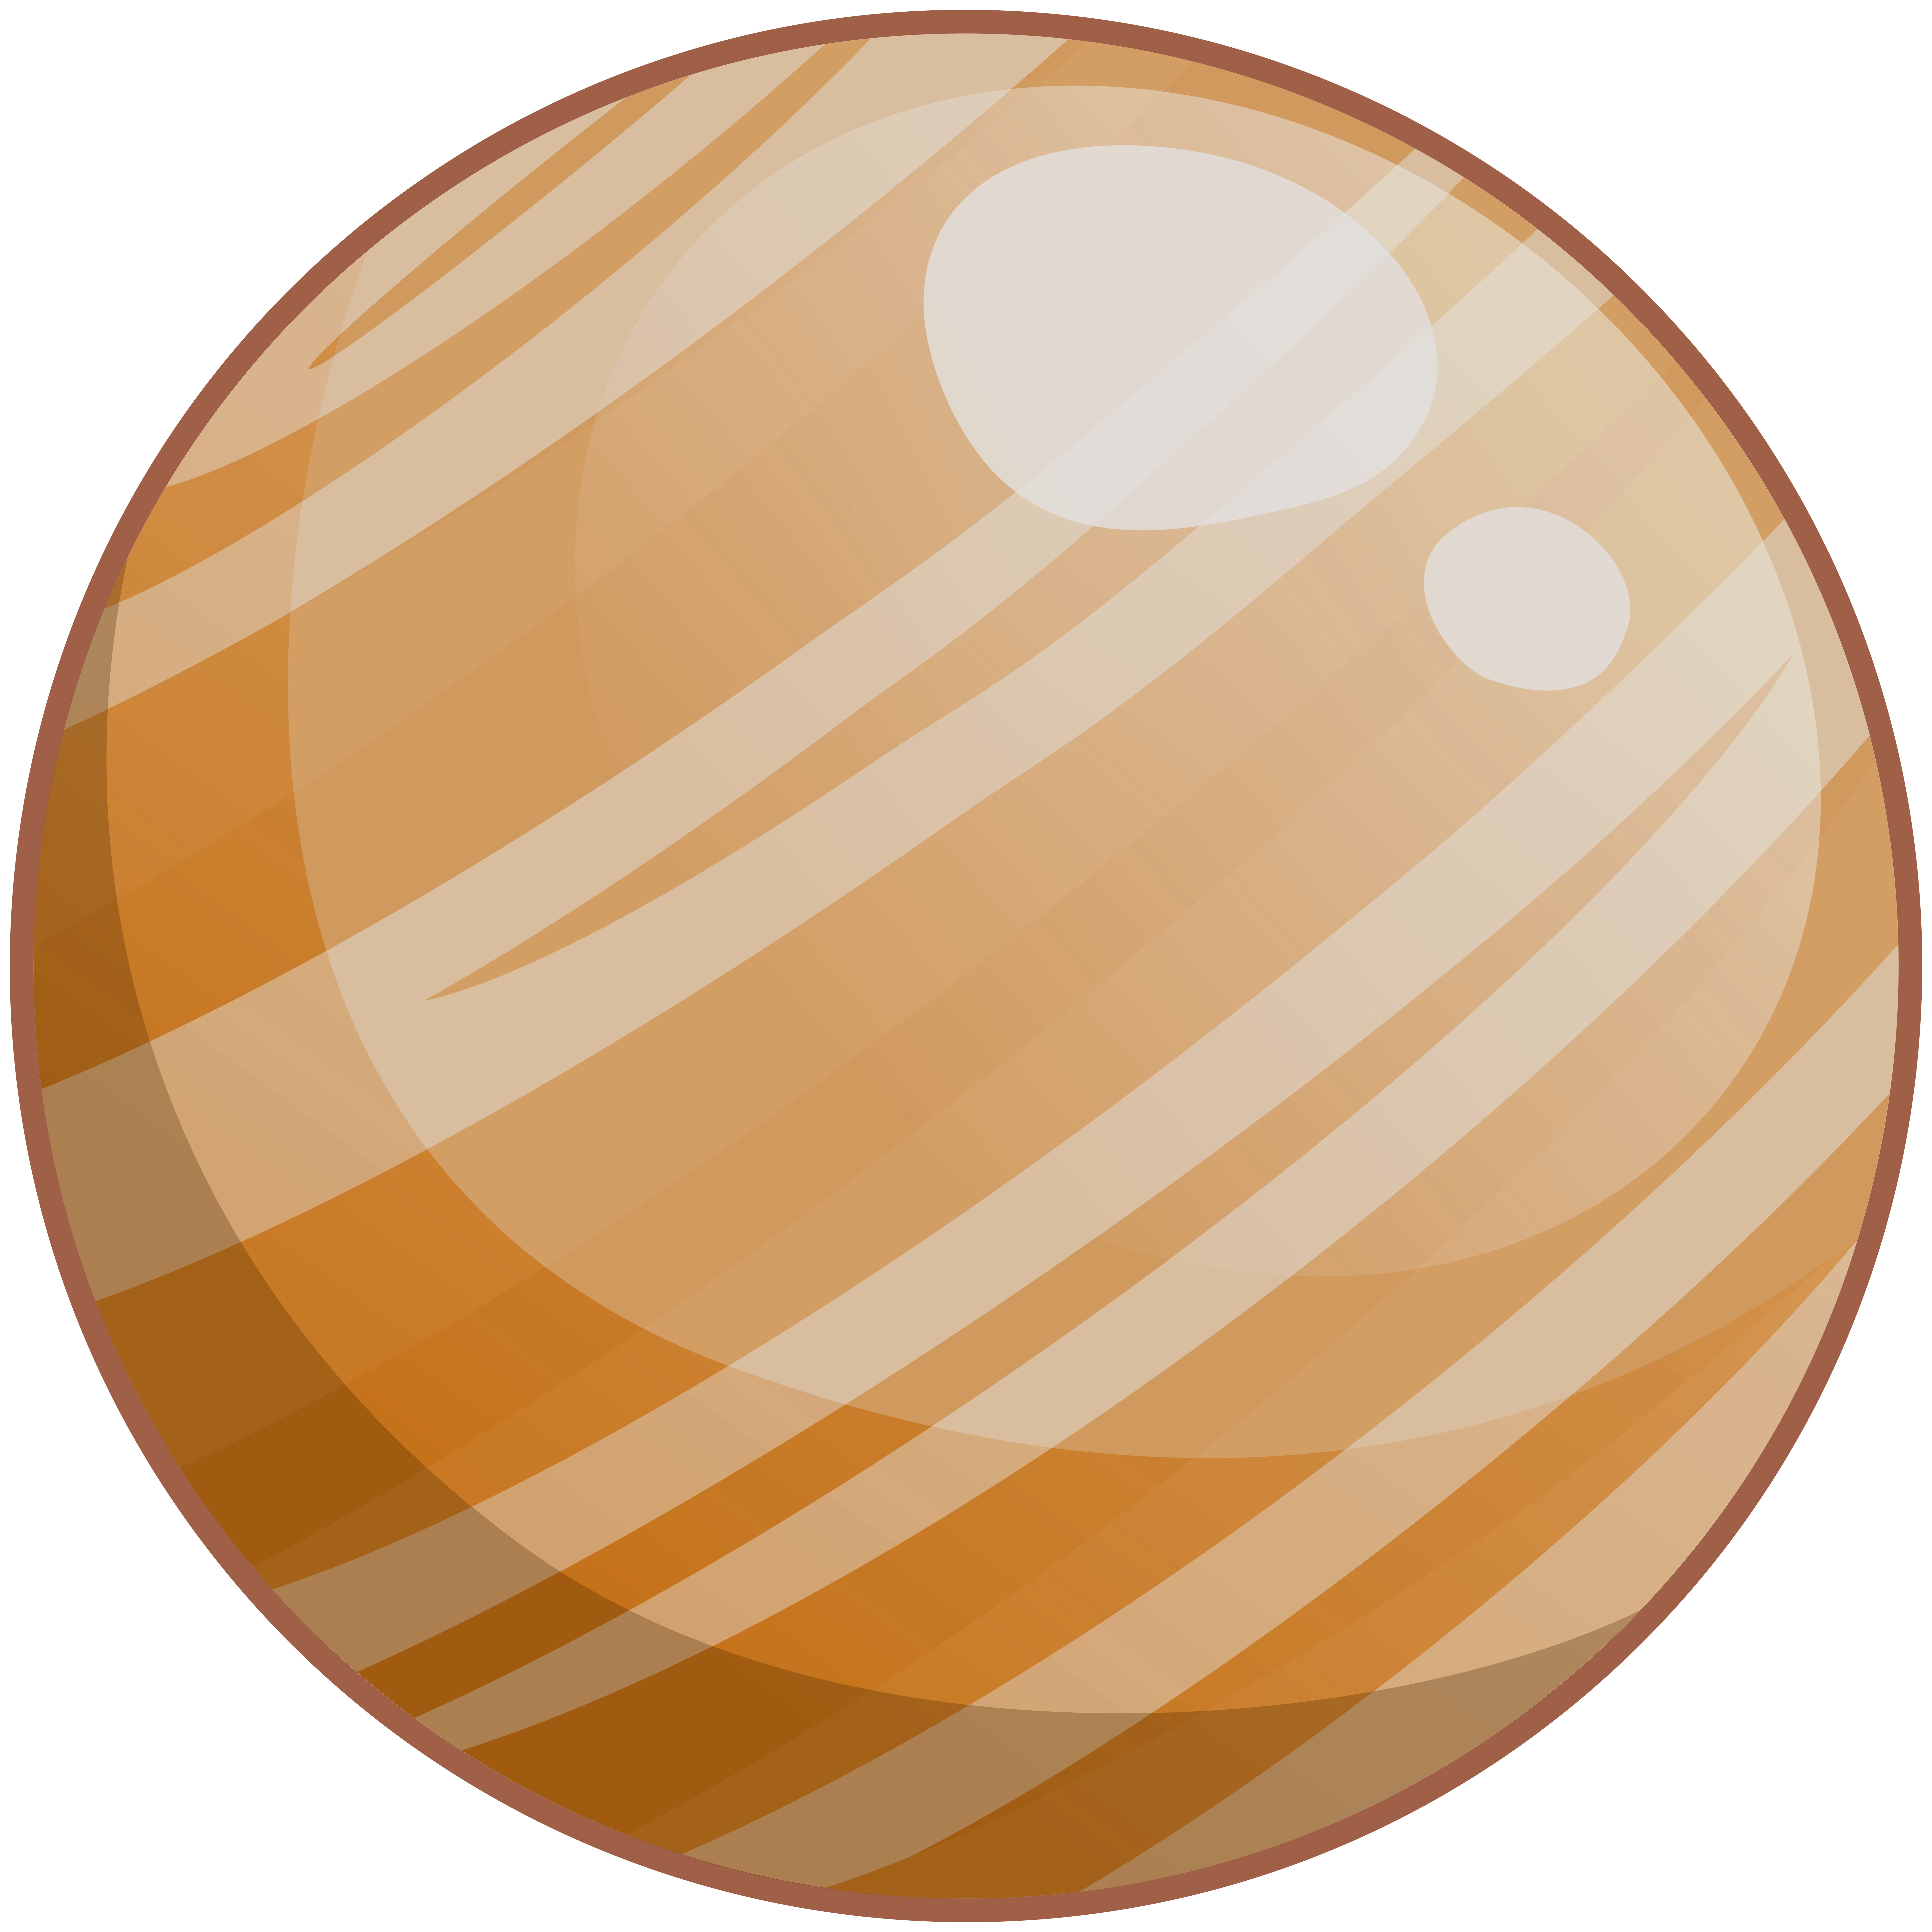 pluto planet png